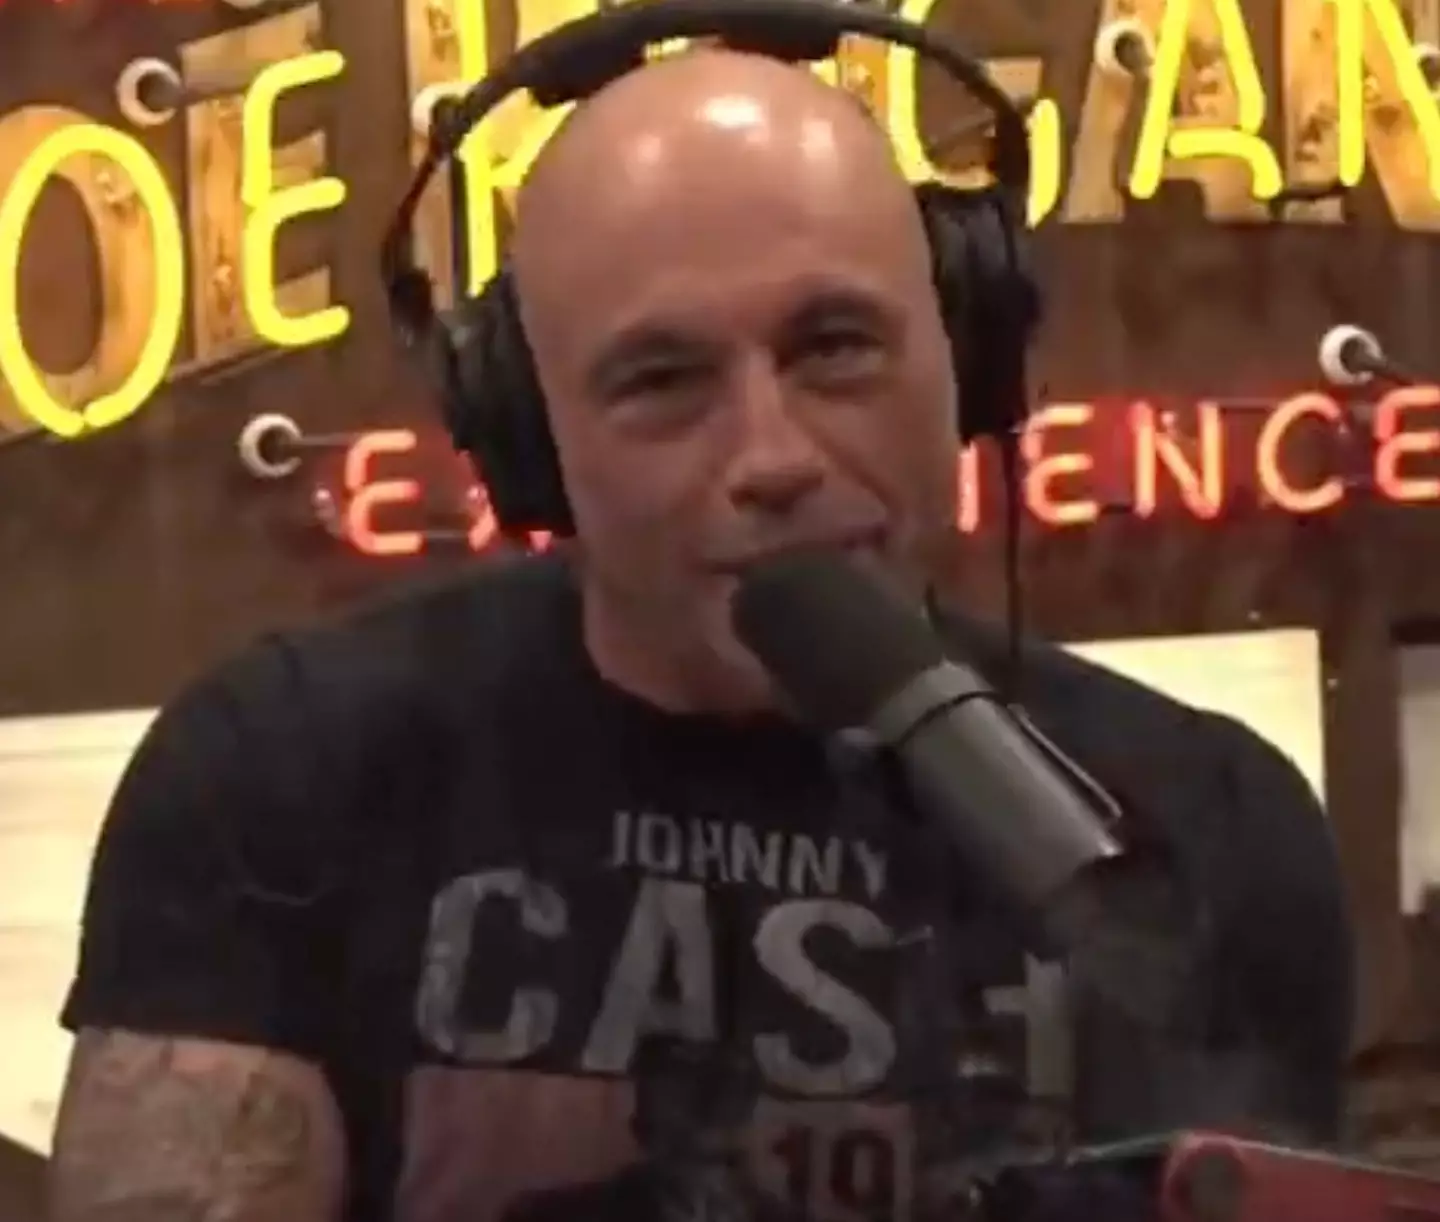 Rogan said people were 'silly'.